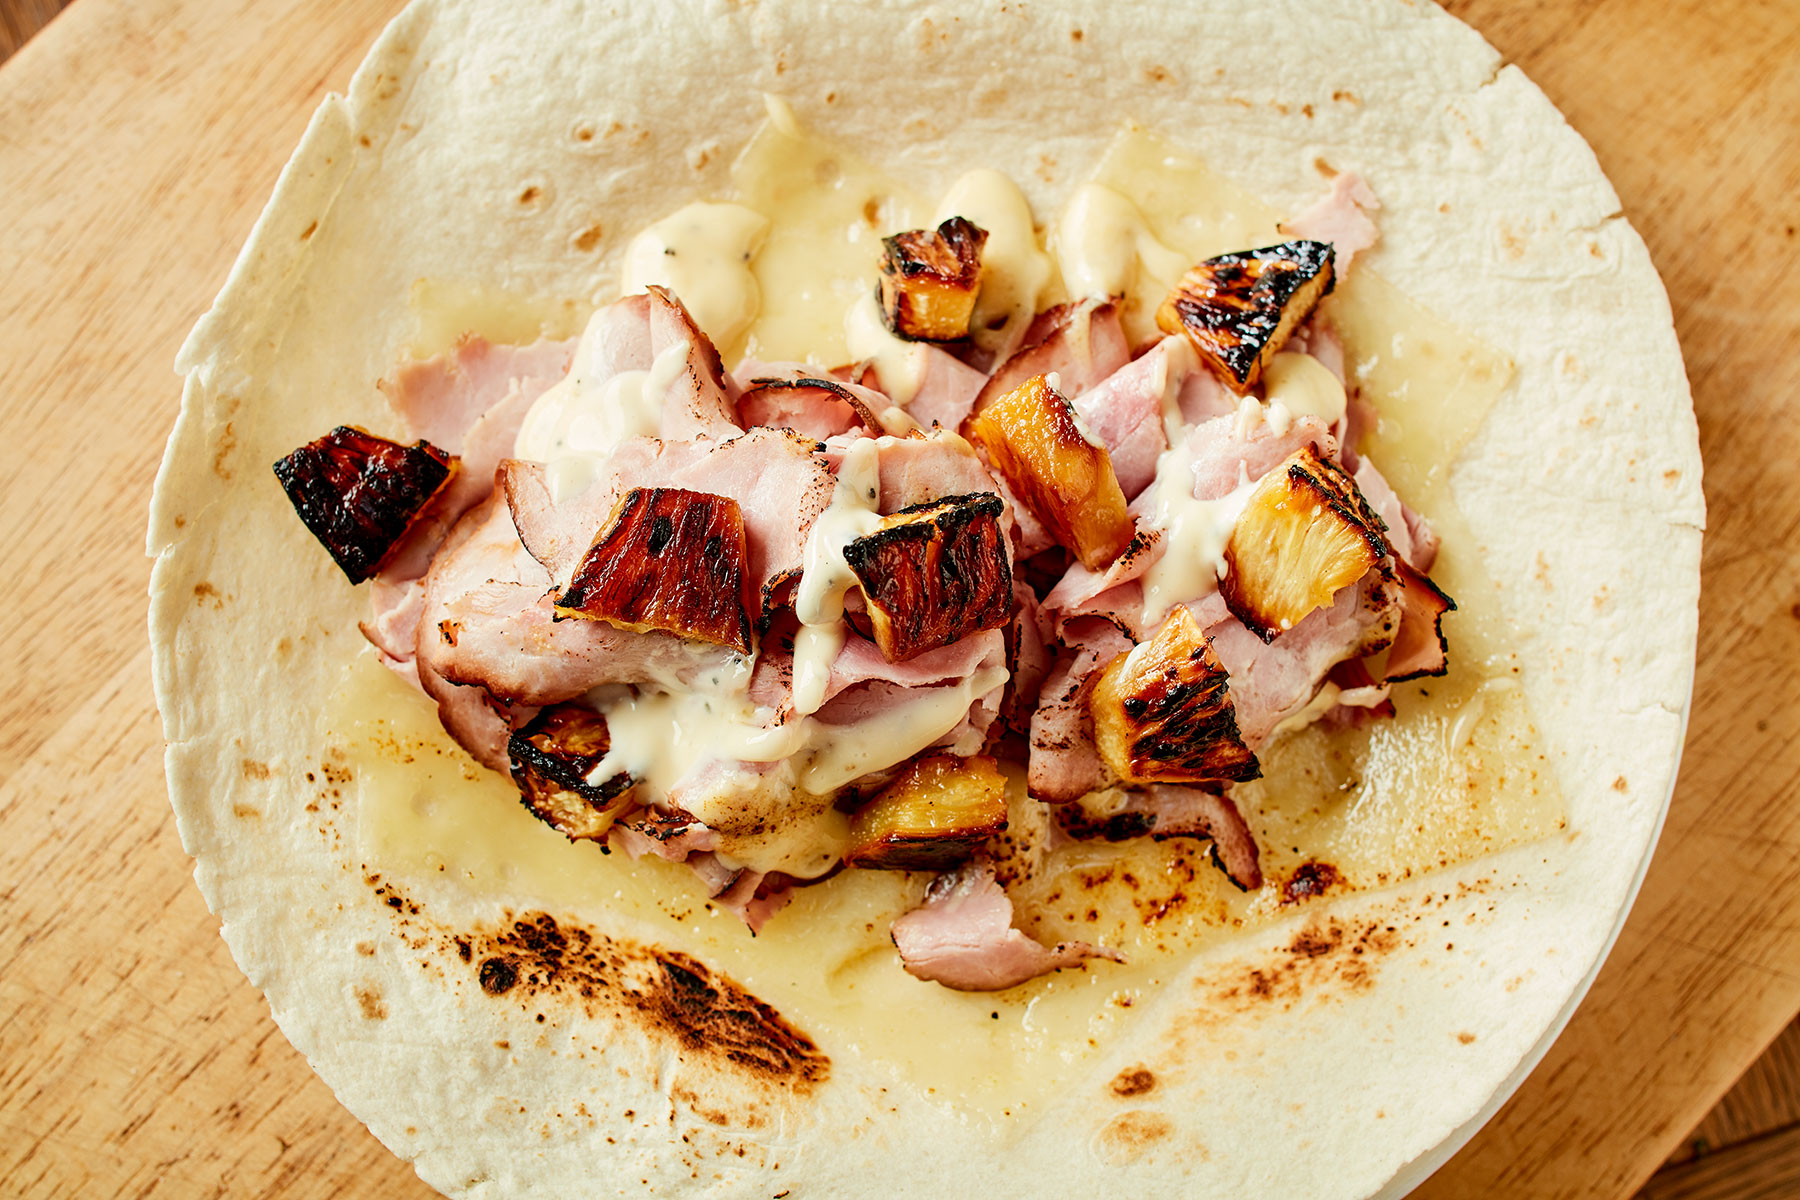 Torched Pineapple, Ham & Cheese Wraps